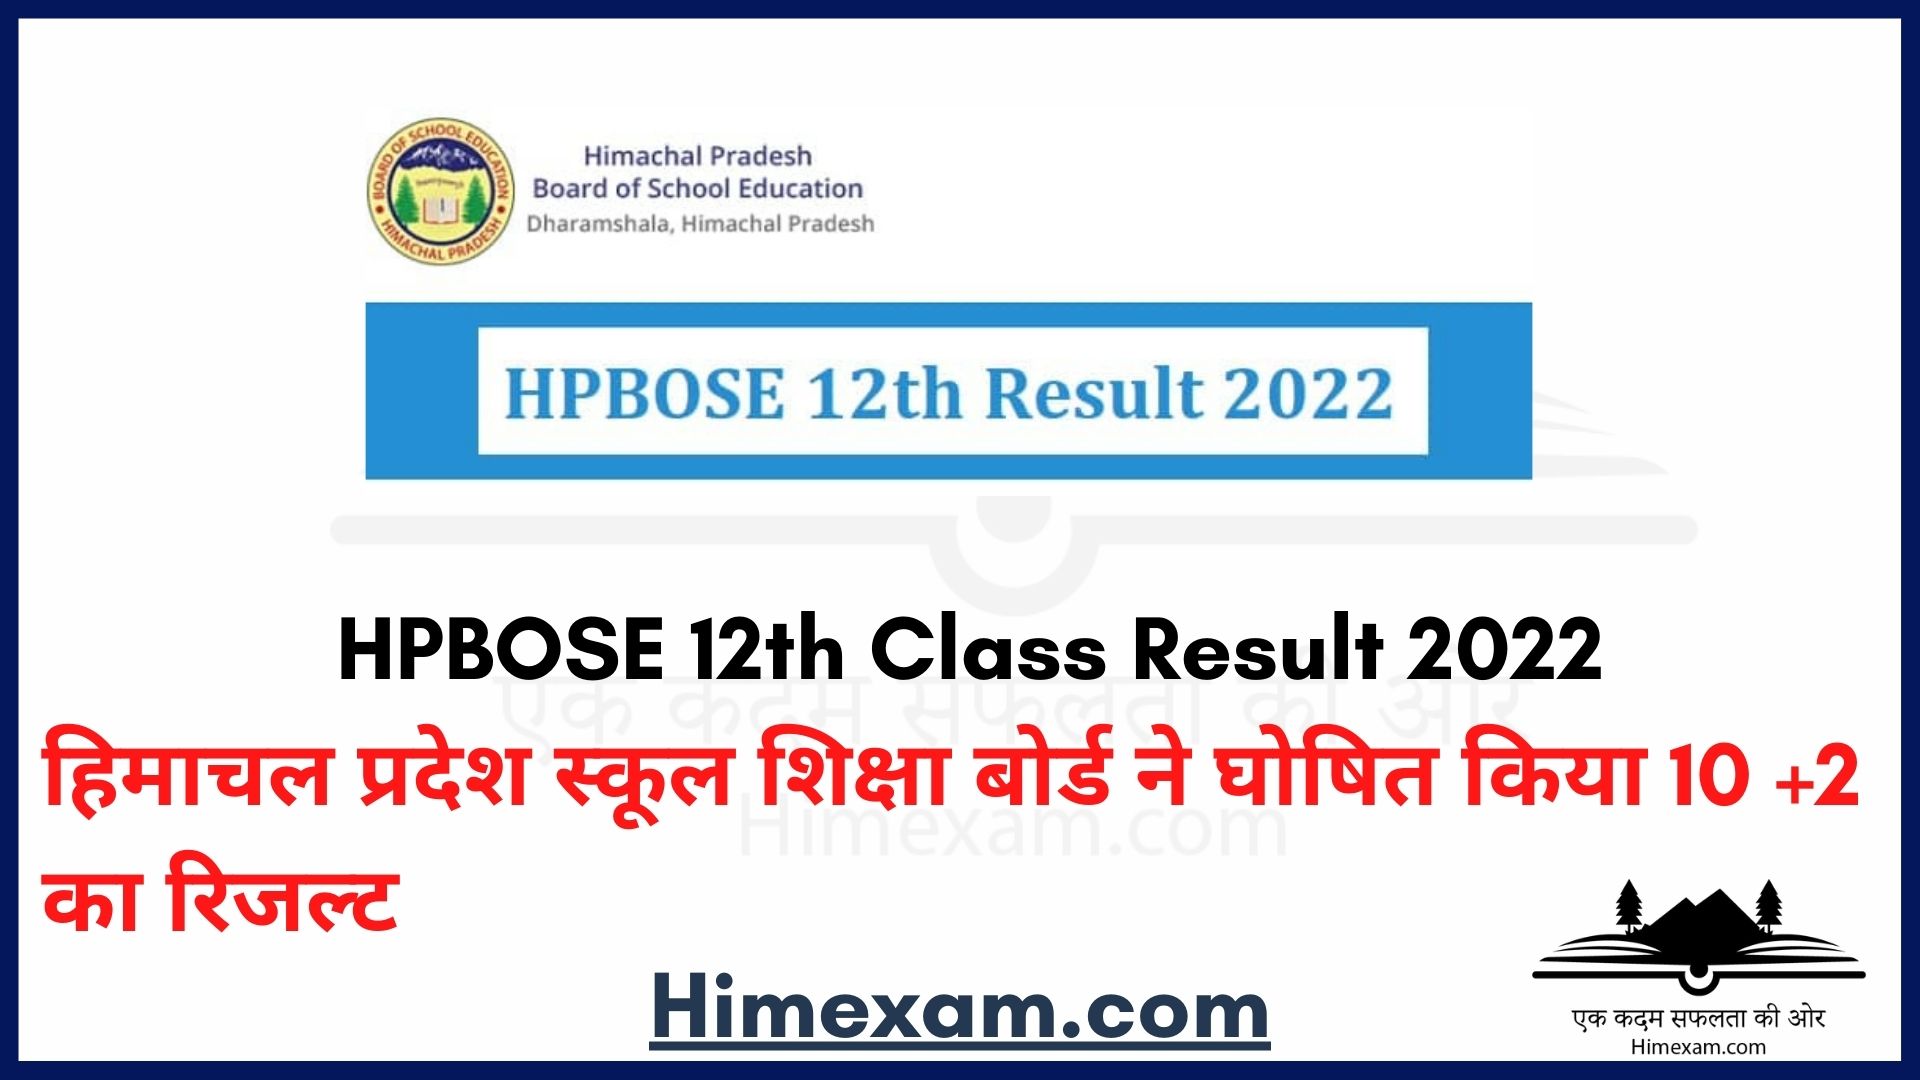 HPBOSE 12th Class Result 2022